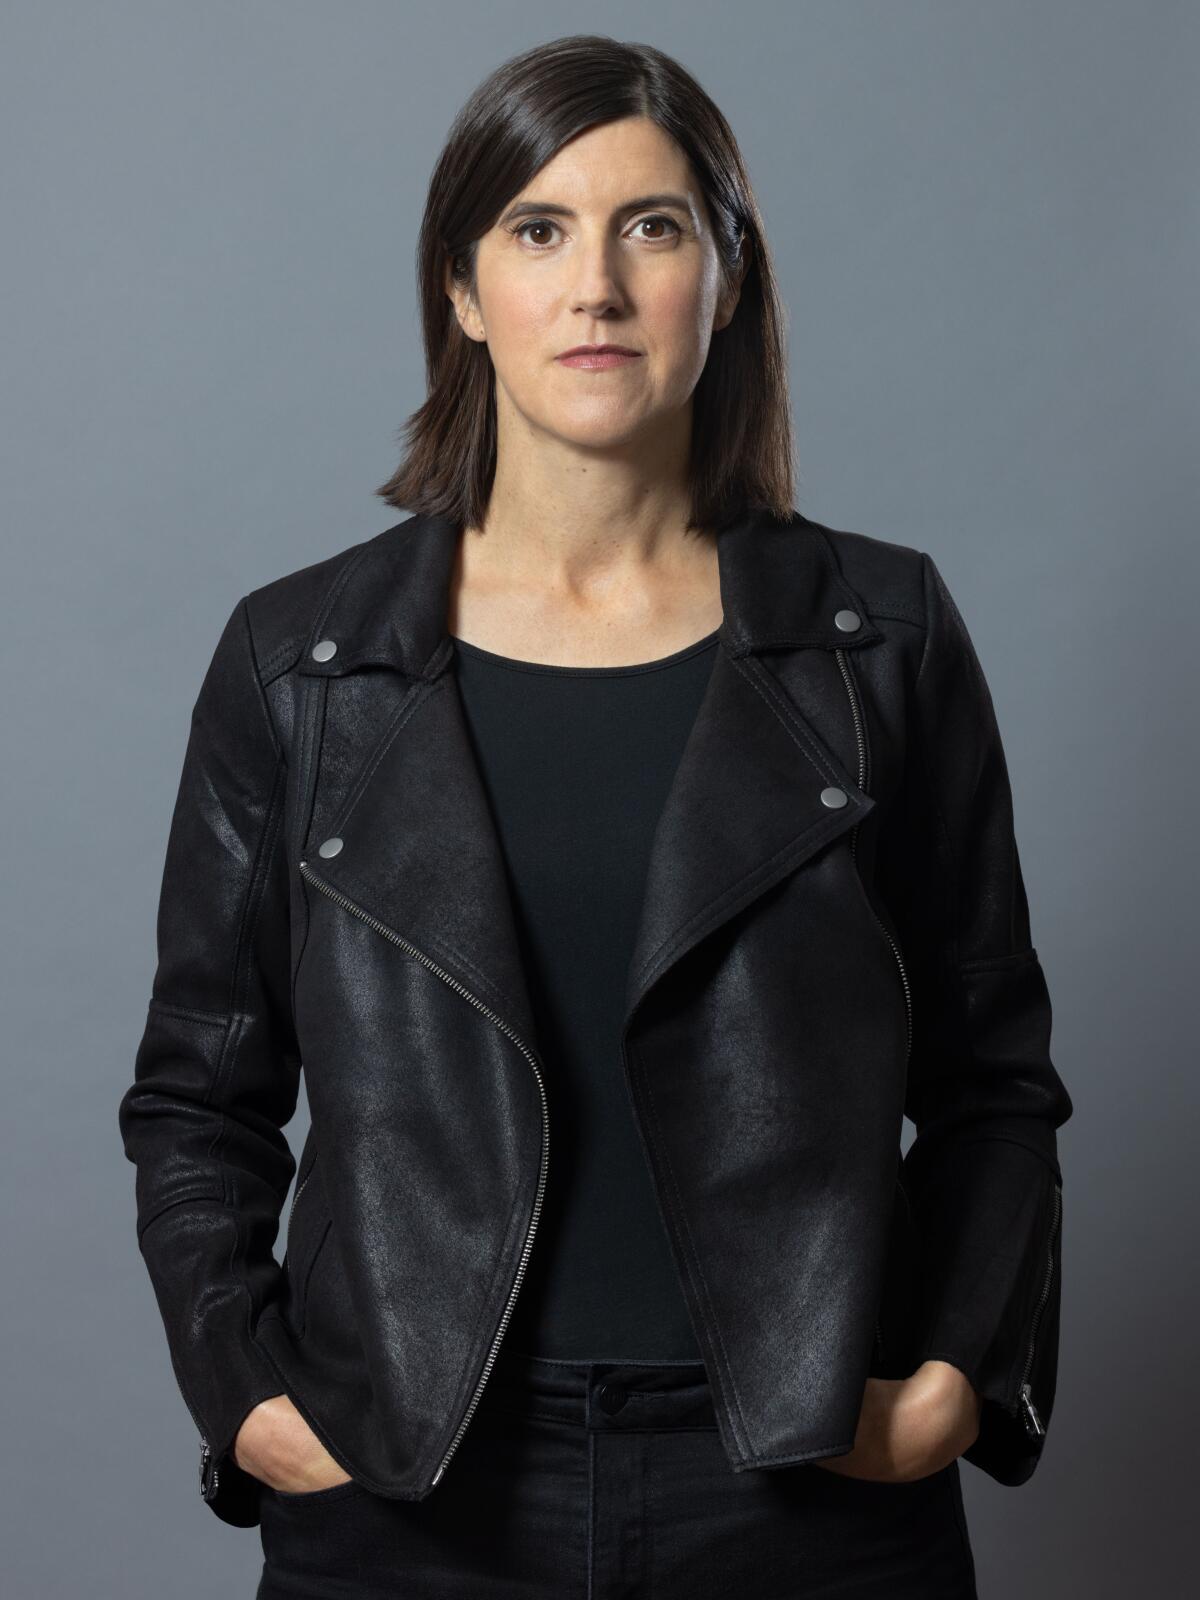 A writer with dark hair wears a black shirt and leather jacket against a gray background.